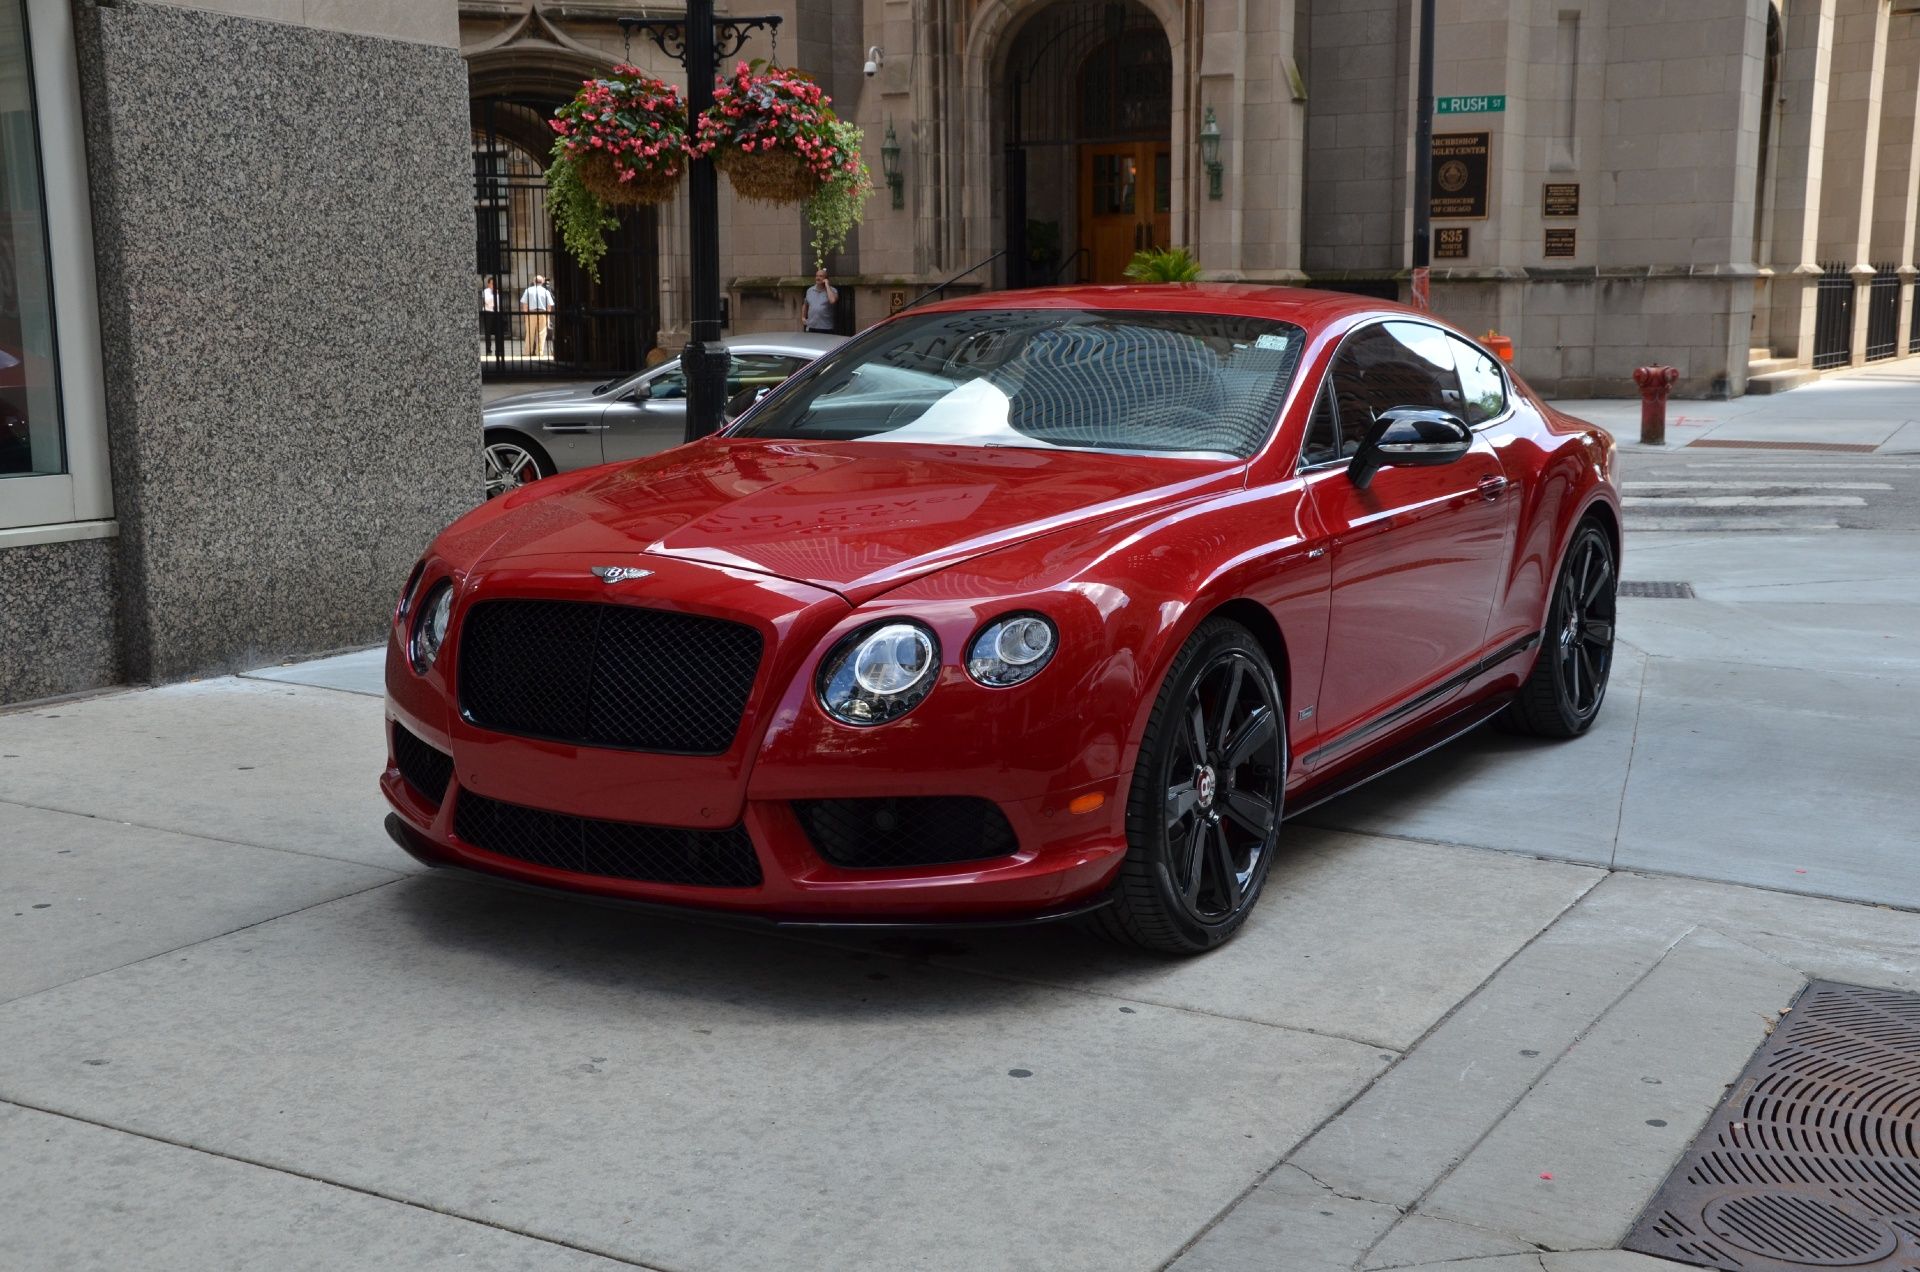 8 - The Least Reliable Cars You Can Buy - Bentley Continental GT